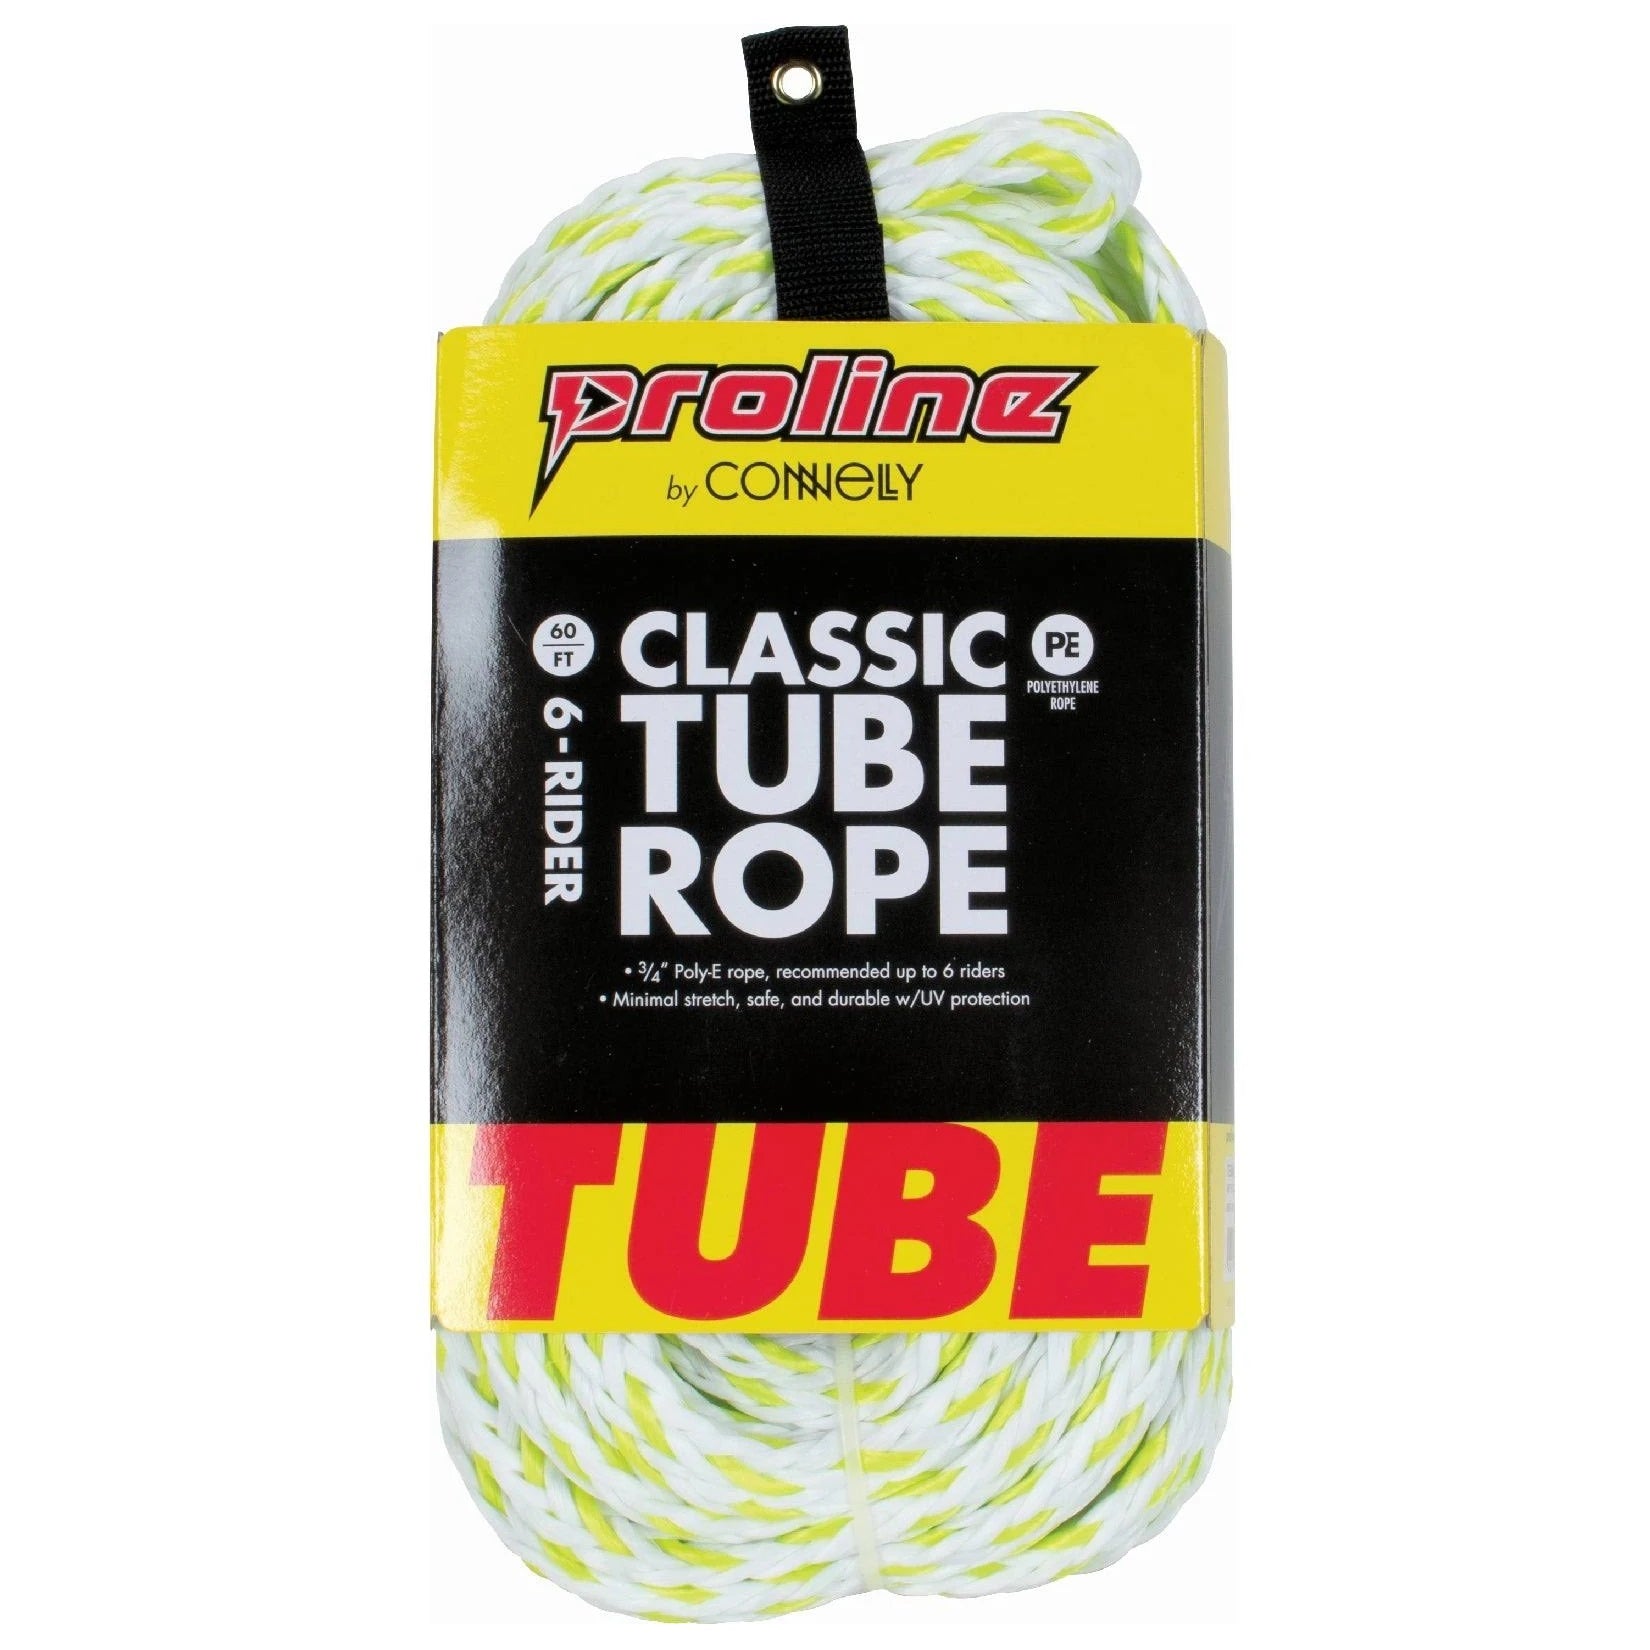 Classic Tube Rope 6 Person